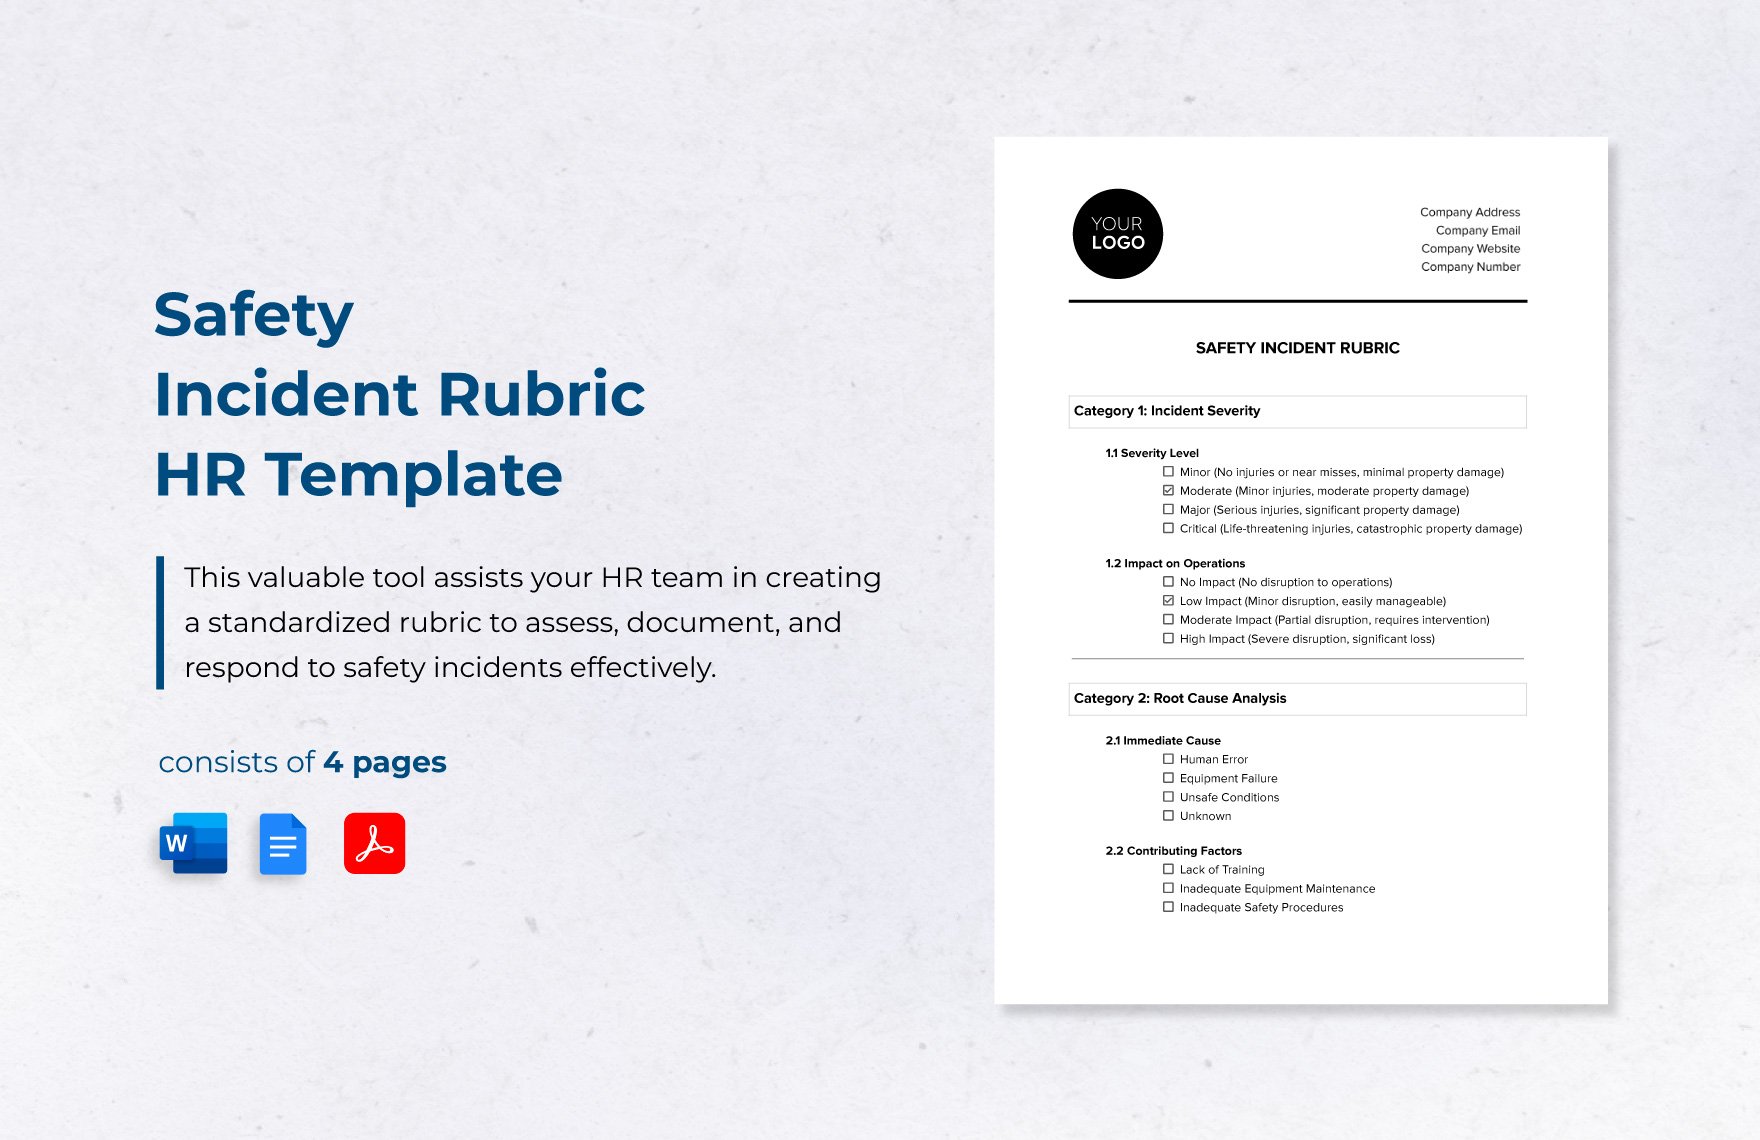 Safety Incident Rubric HR Template